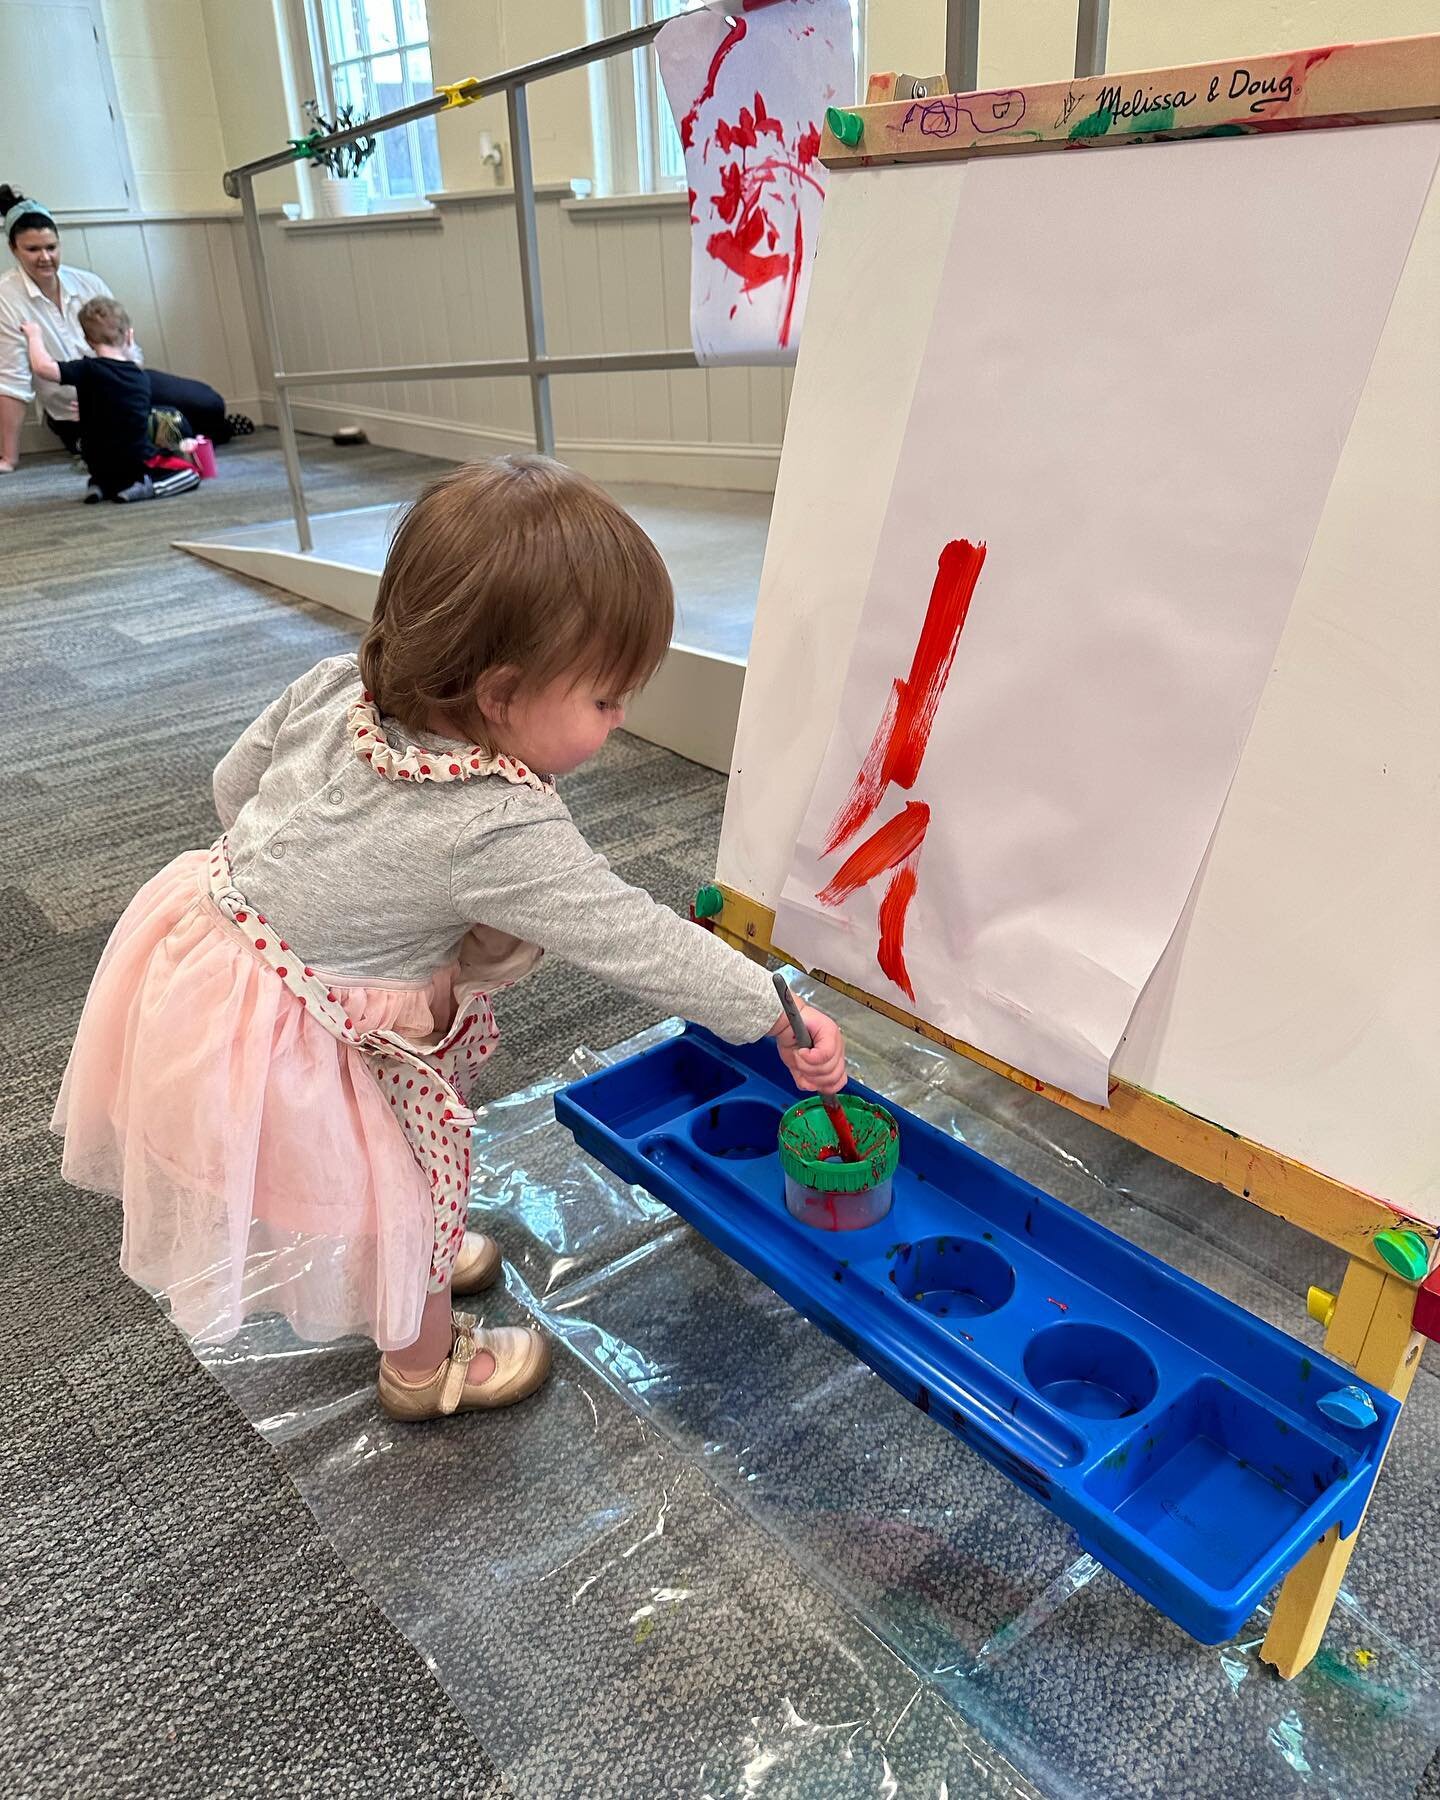 In Montessori we talk a lot about purposeful play or purposeful work. This picture shows a little one who on this day picked up the paint brush and painted on the easel for the first time that session! Her mom and I gasped in surprise and she snapped